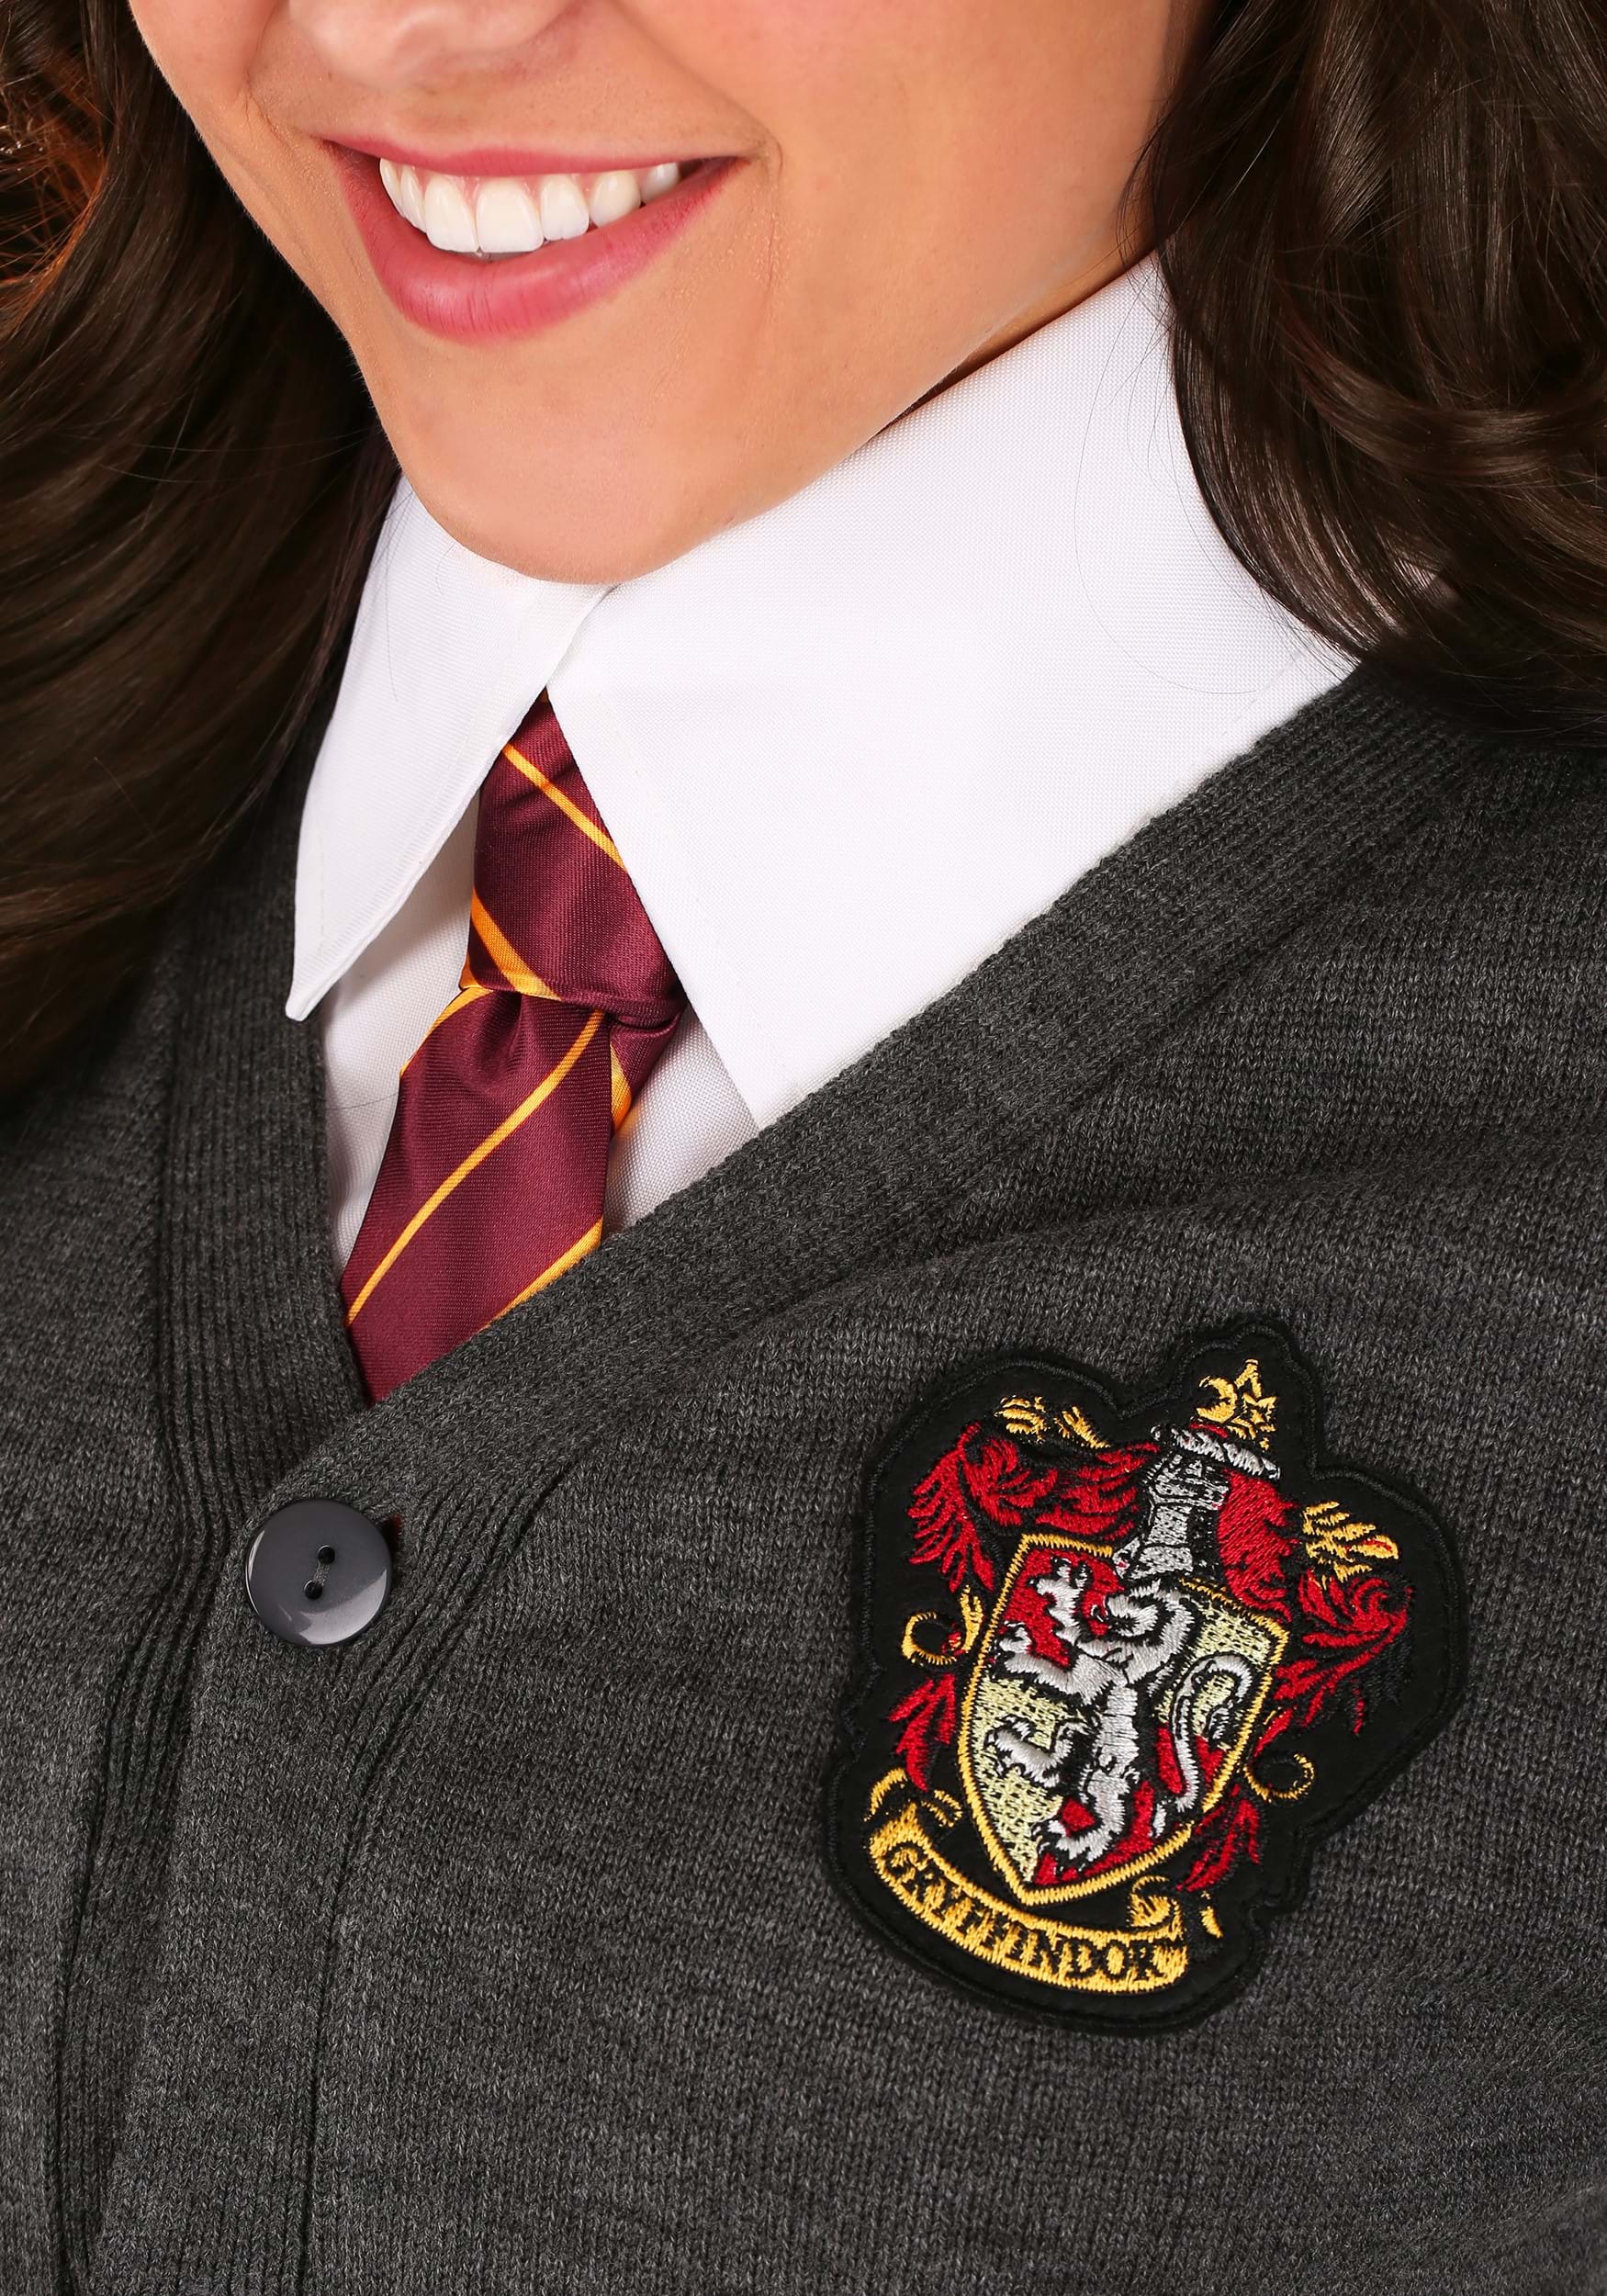 Womens Deluxe Harry Potter Hermione Costume